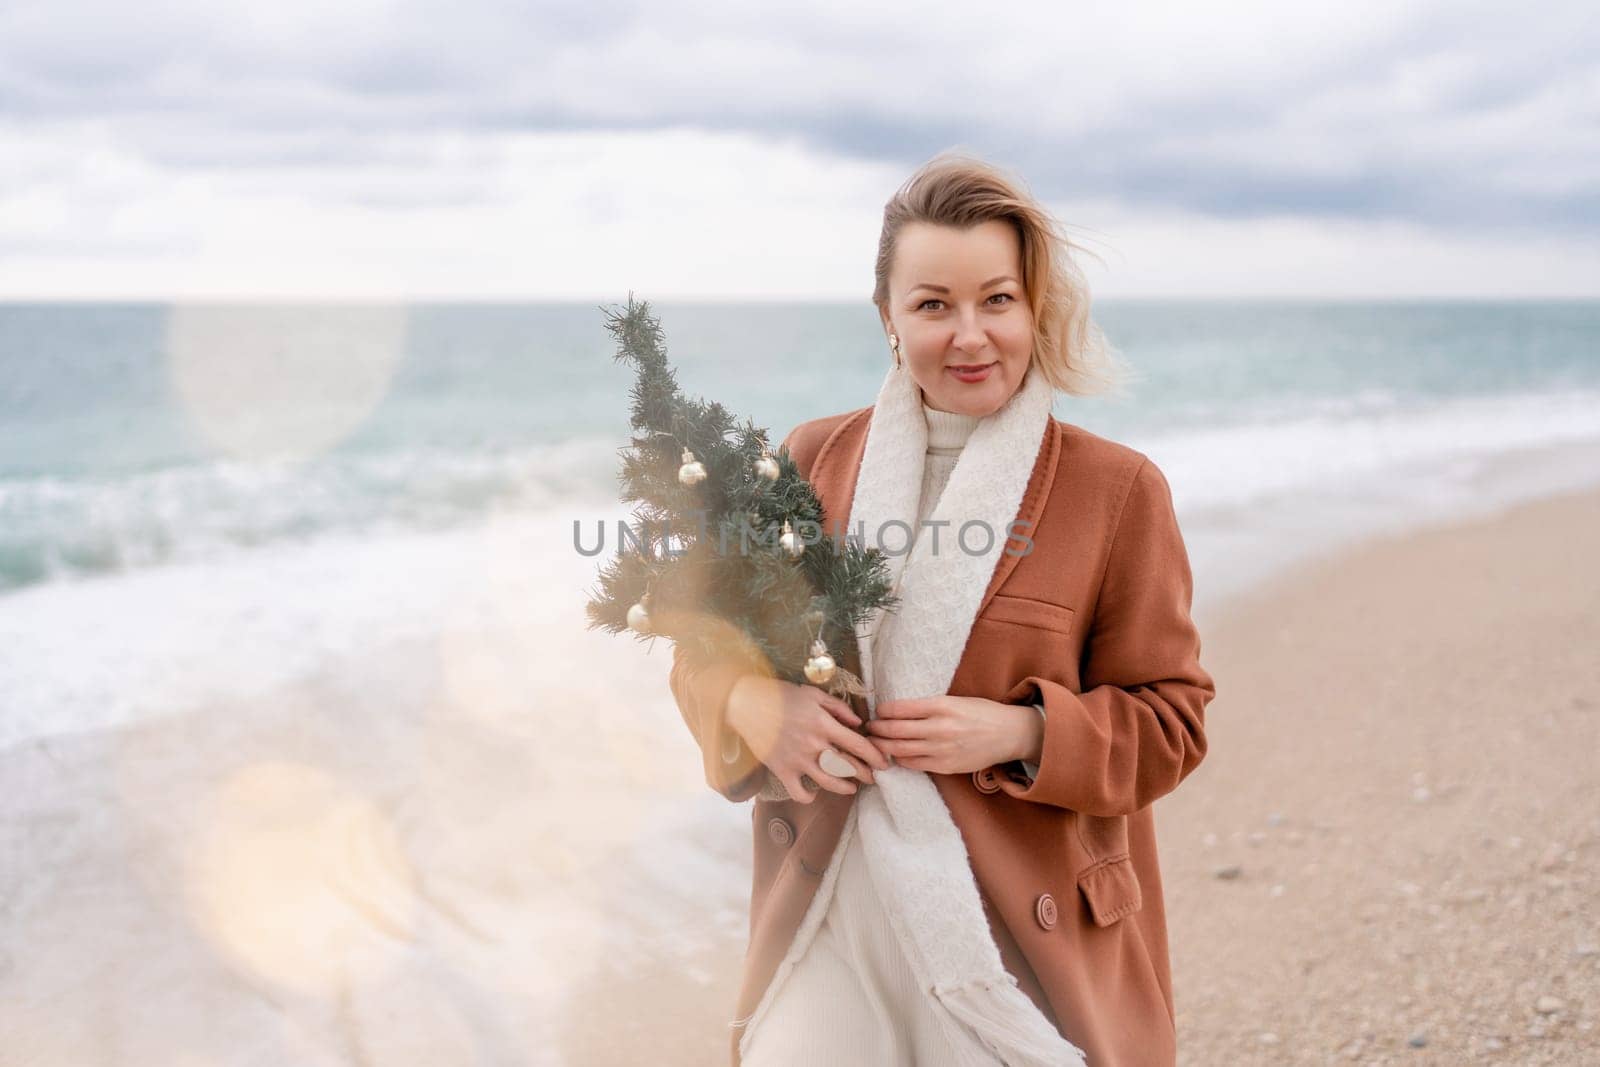 Blond woman Christmas sea. Christmas portrait of a happy woman walking along the beach and holding a Christmas tree in her hands. She is wearing a brown coat and a white suit